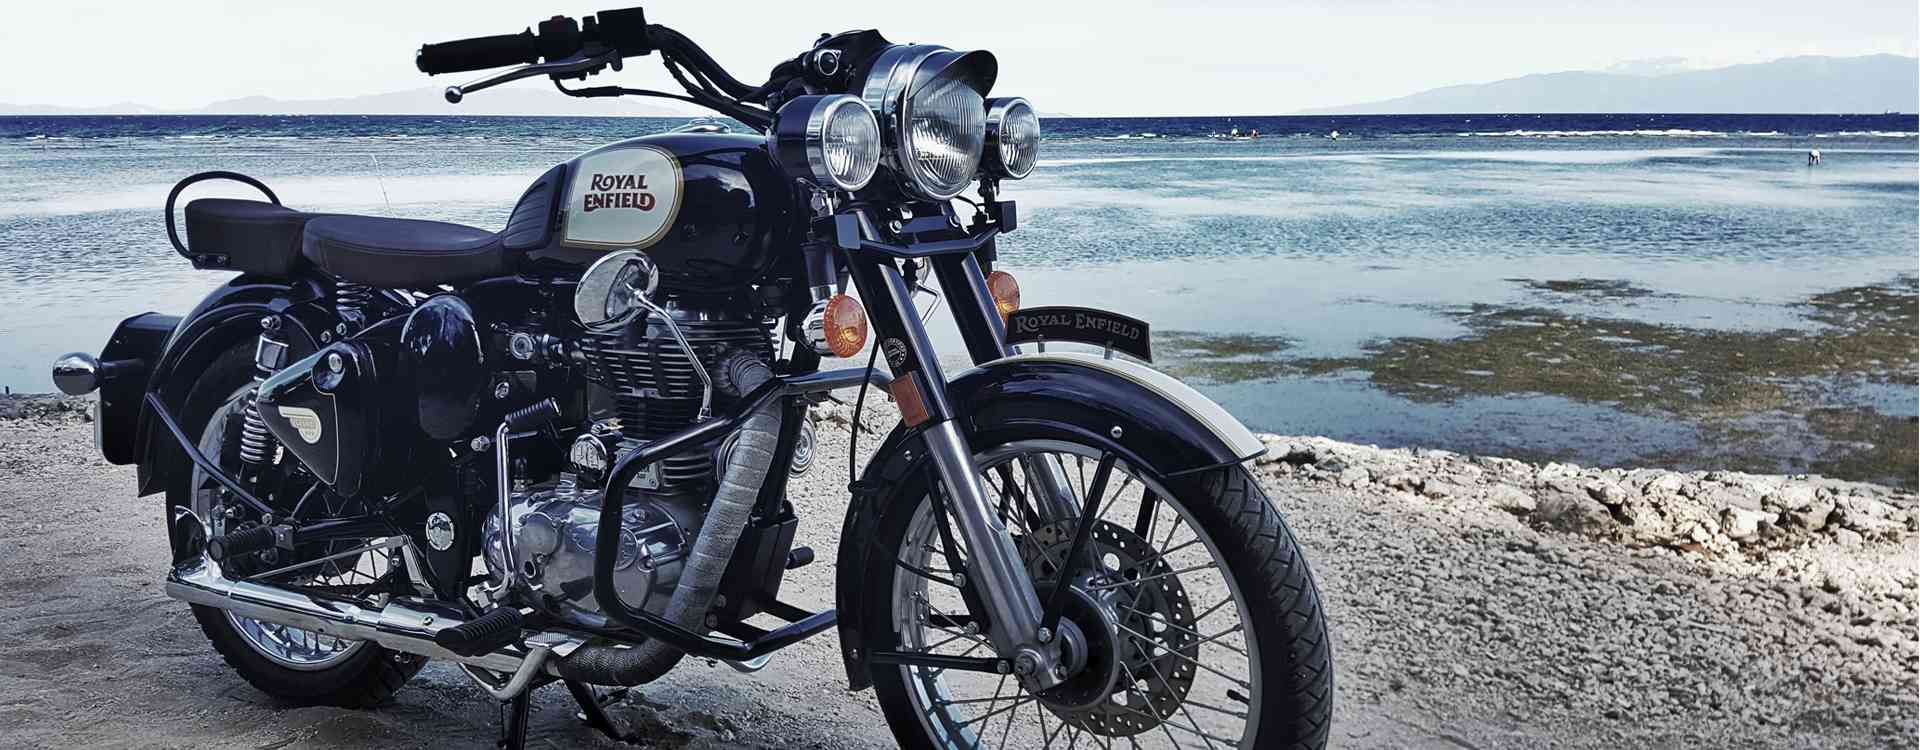 Royal Enfield Classic 500 Tribute Black limited to just 240 units launched   HT Auto